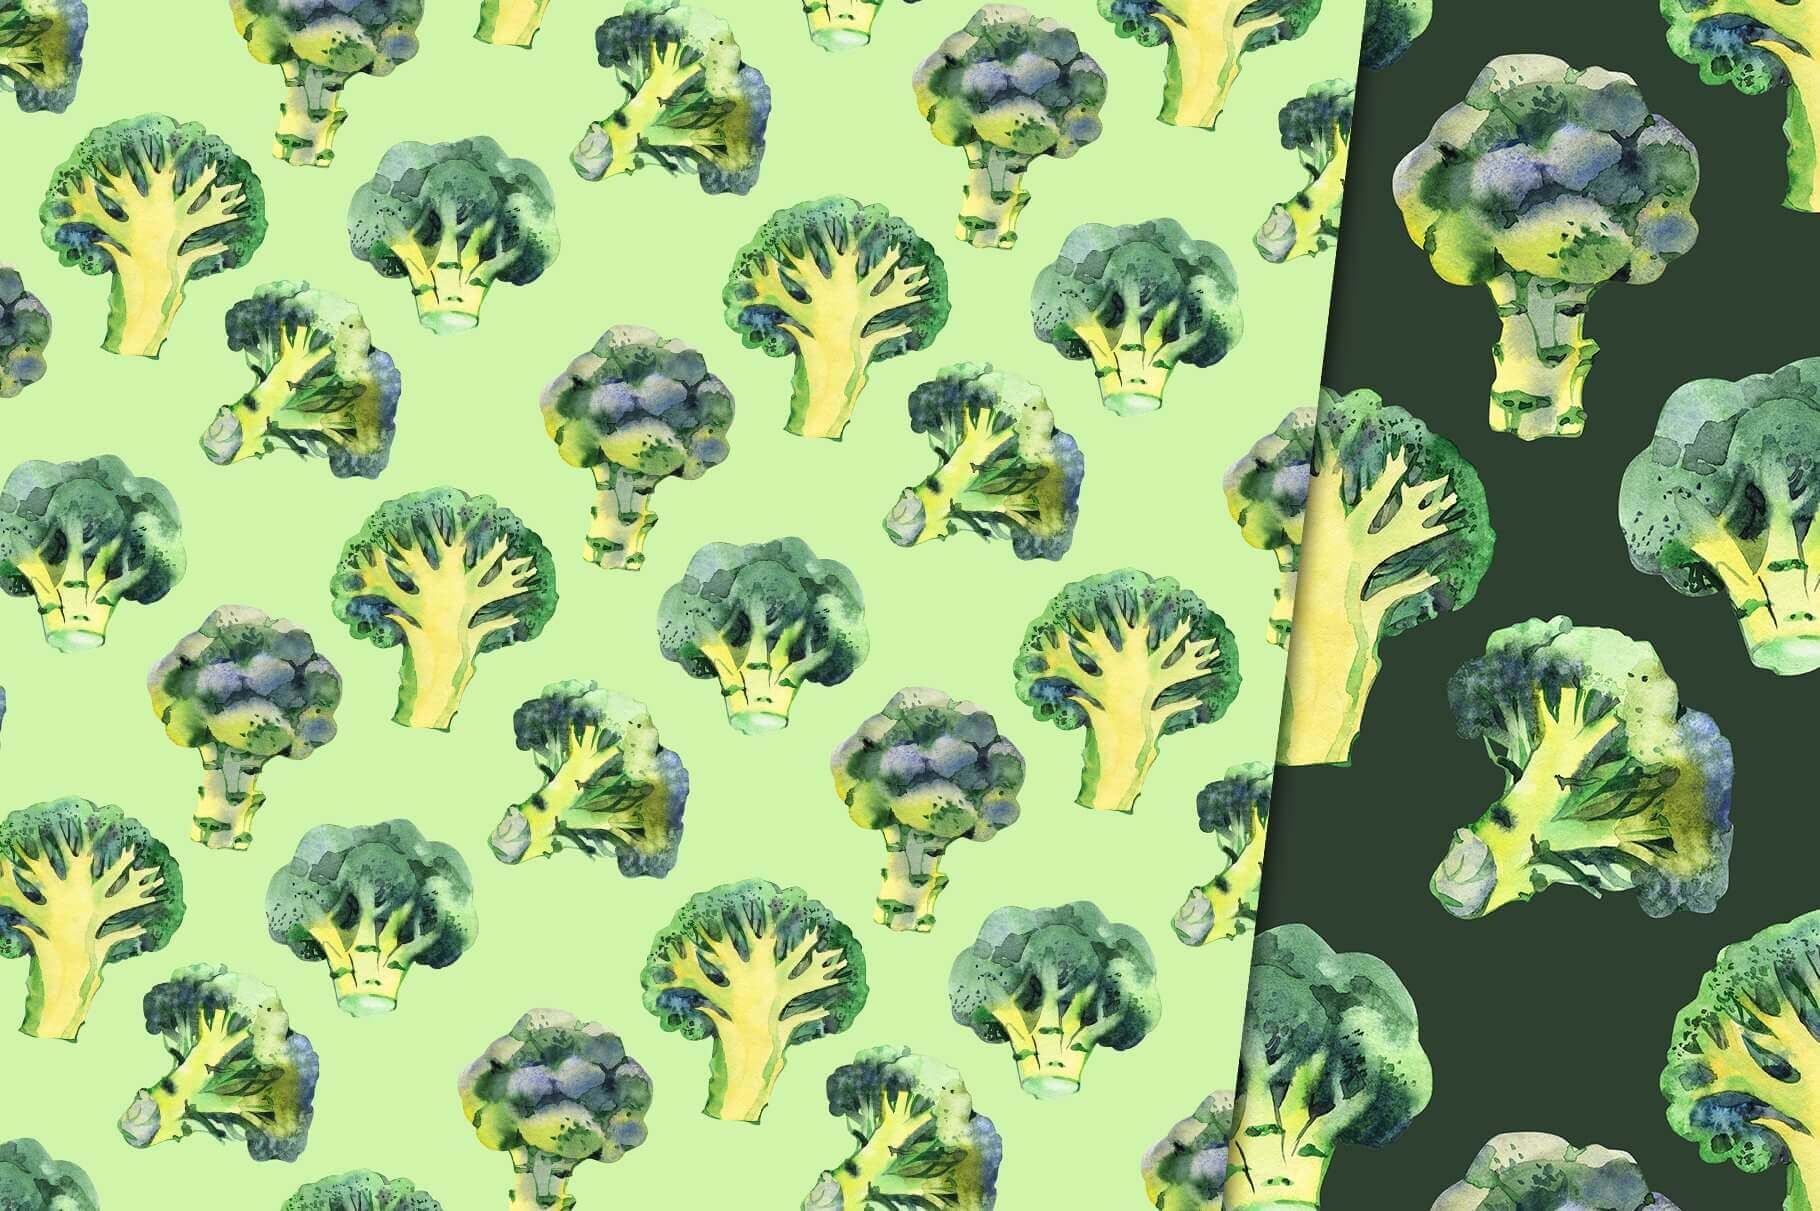 Two samples of broccoli print on light green and dark green backgrounds.